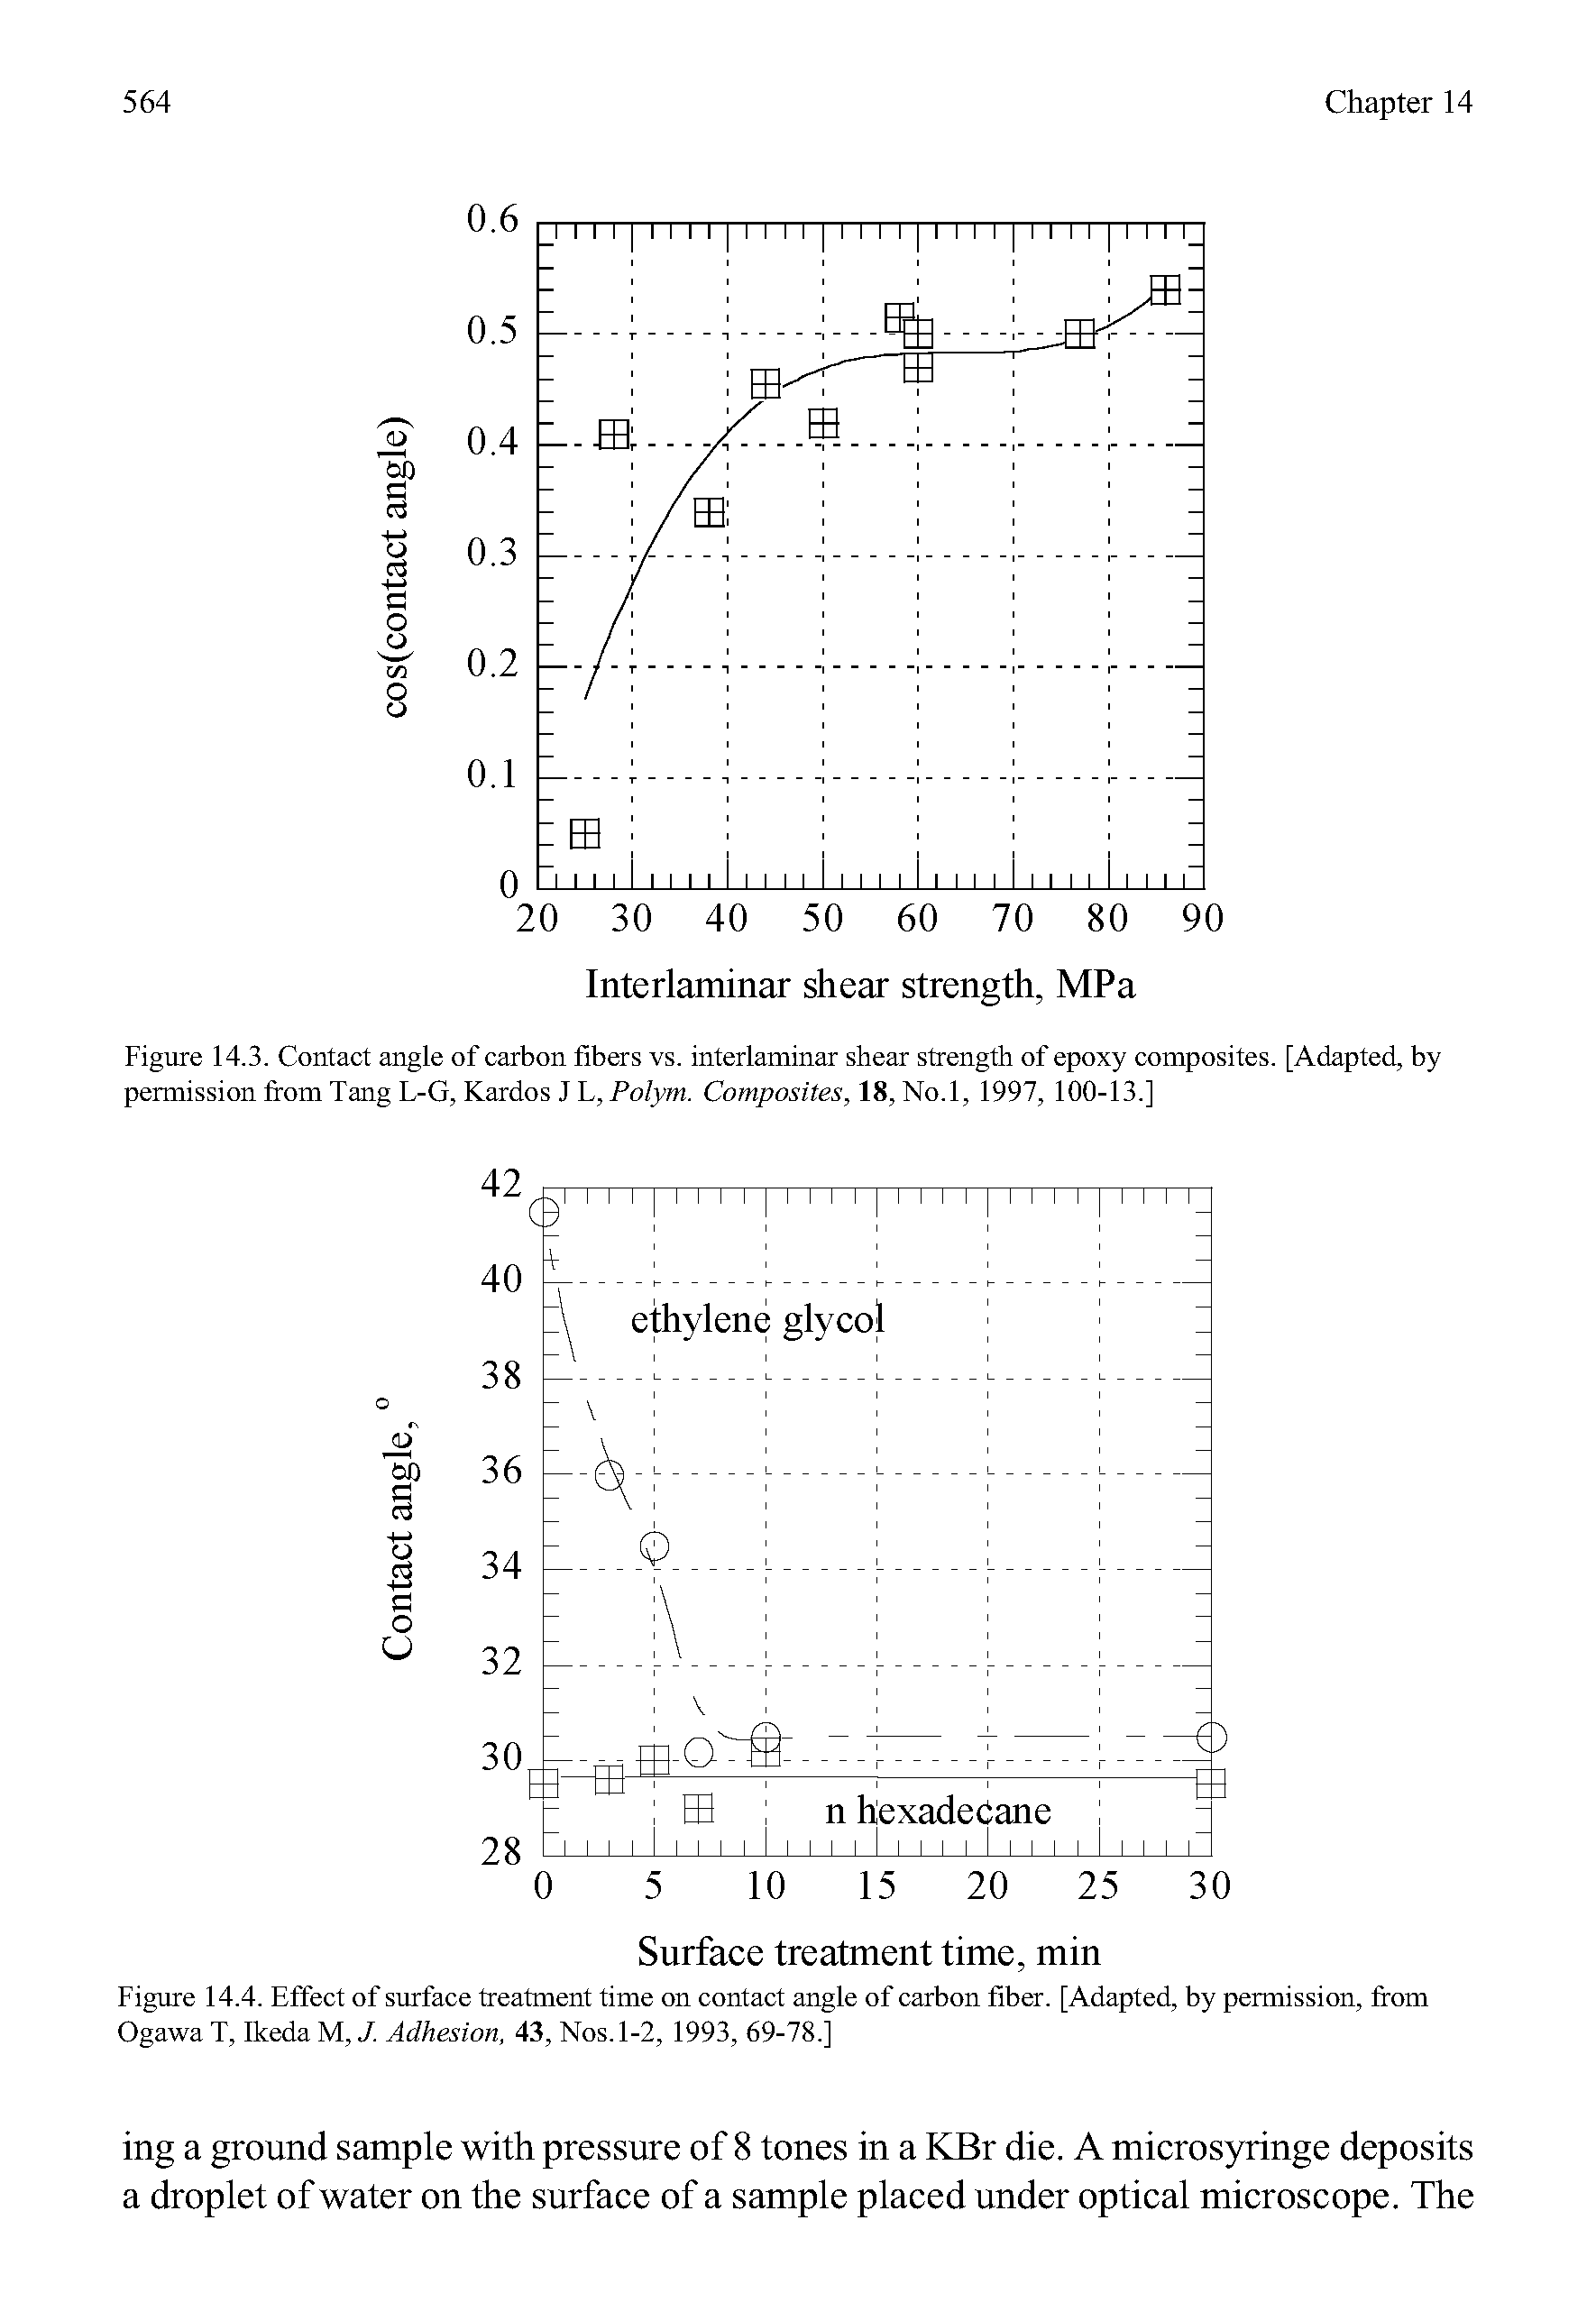 Figure 14.3. Contact angle of carbon fibers vs. interlaminar shear strength of epoxy composites. [Adapted, by permission from Tang L-G, Kardos J L, Polym. Composites, 18, No.l, 1997, 100-13.]...